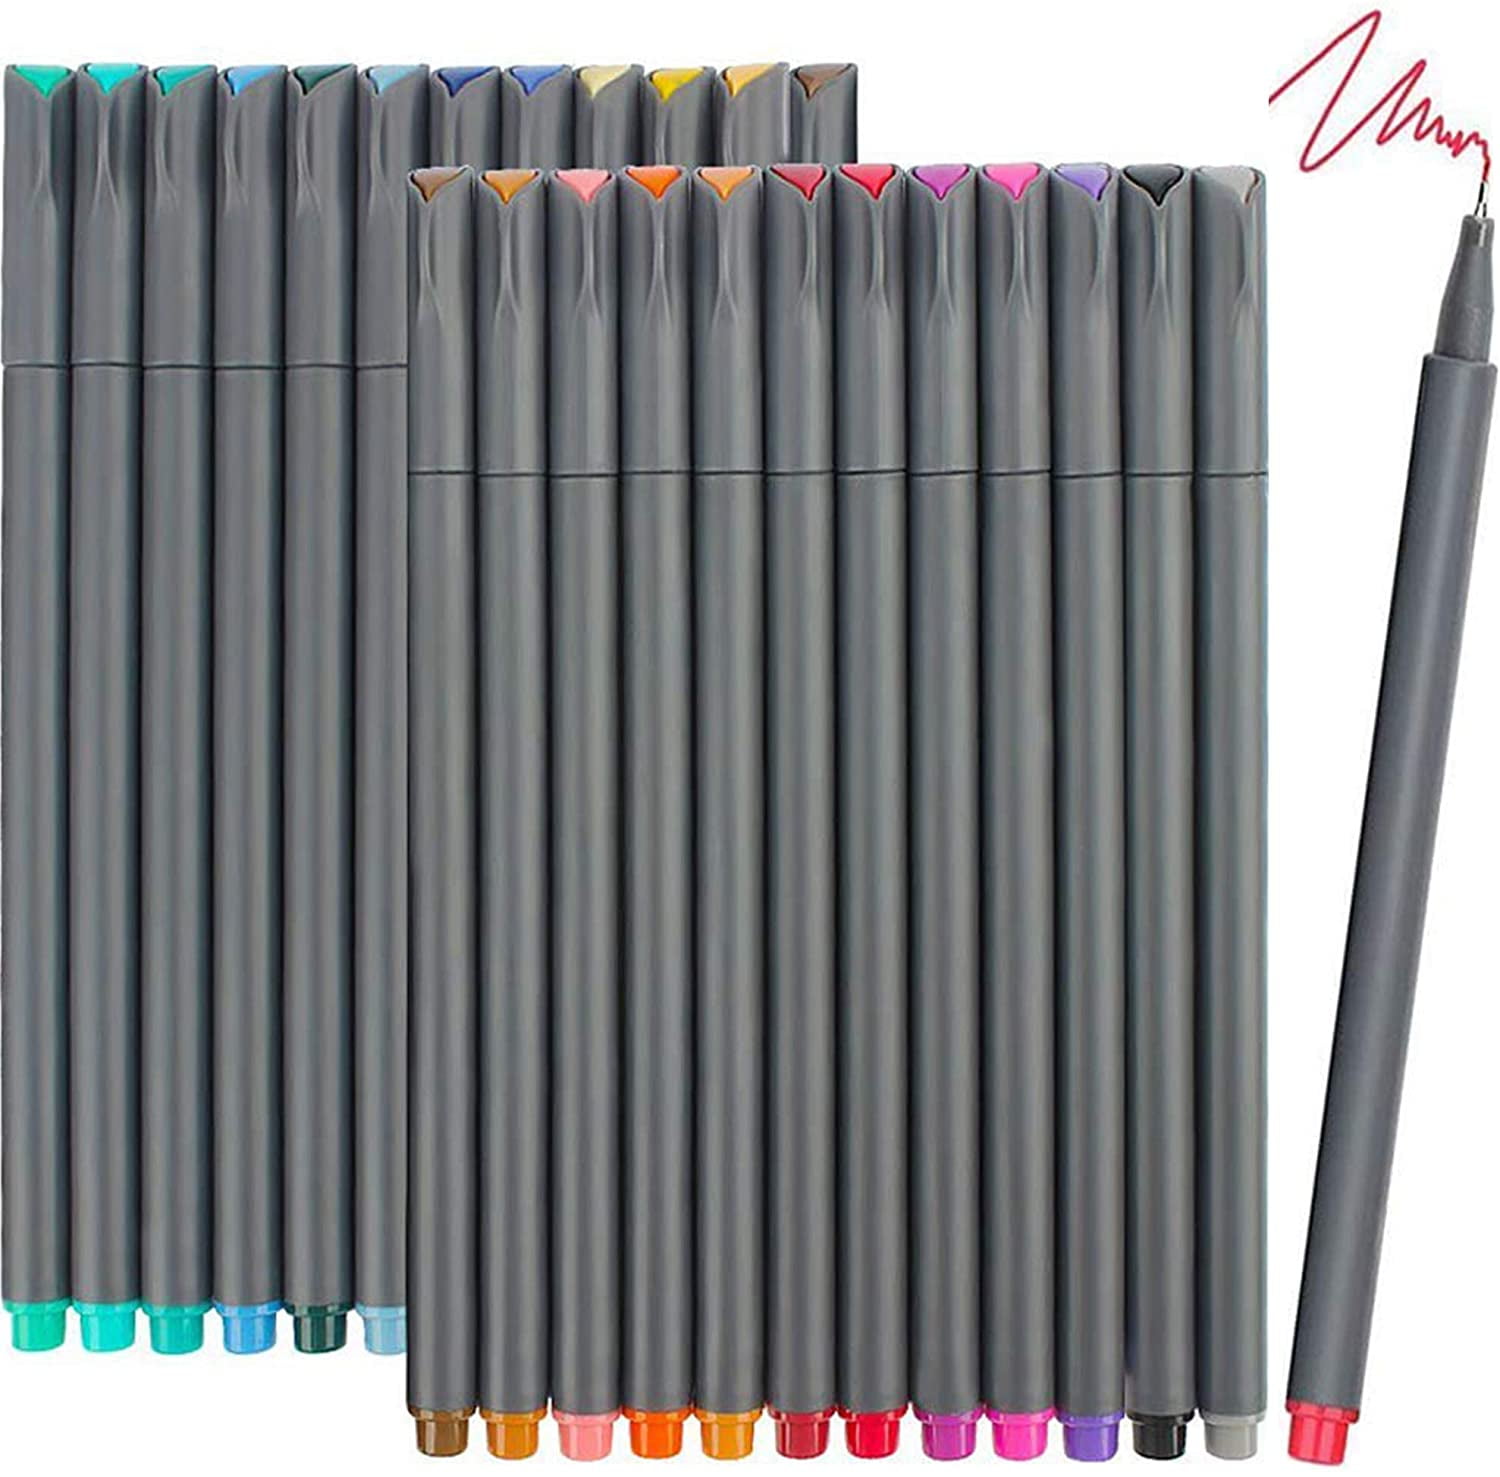 Journal Planner Pens Colored Pens Fine Point Markers Fine Tip Drawing Pen